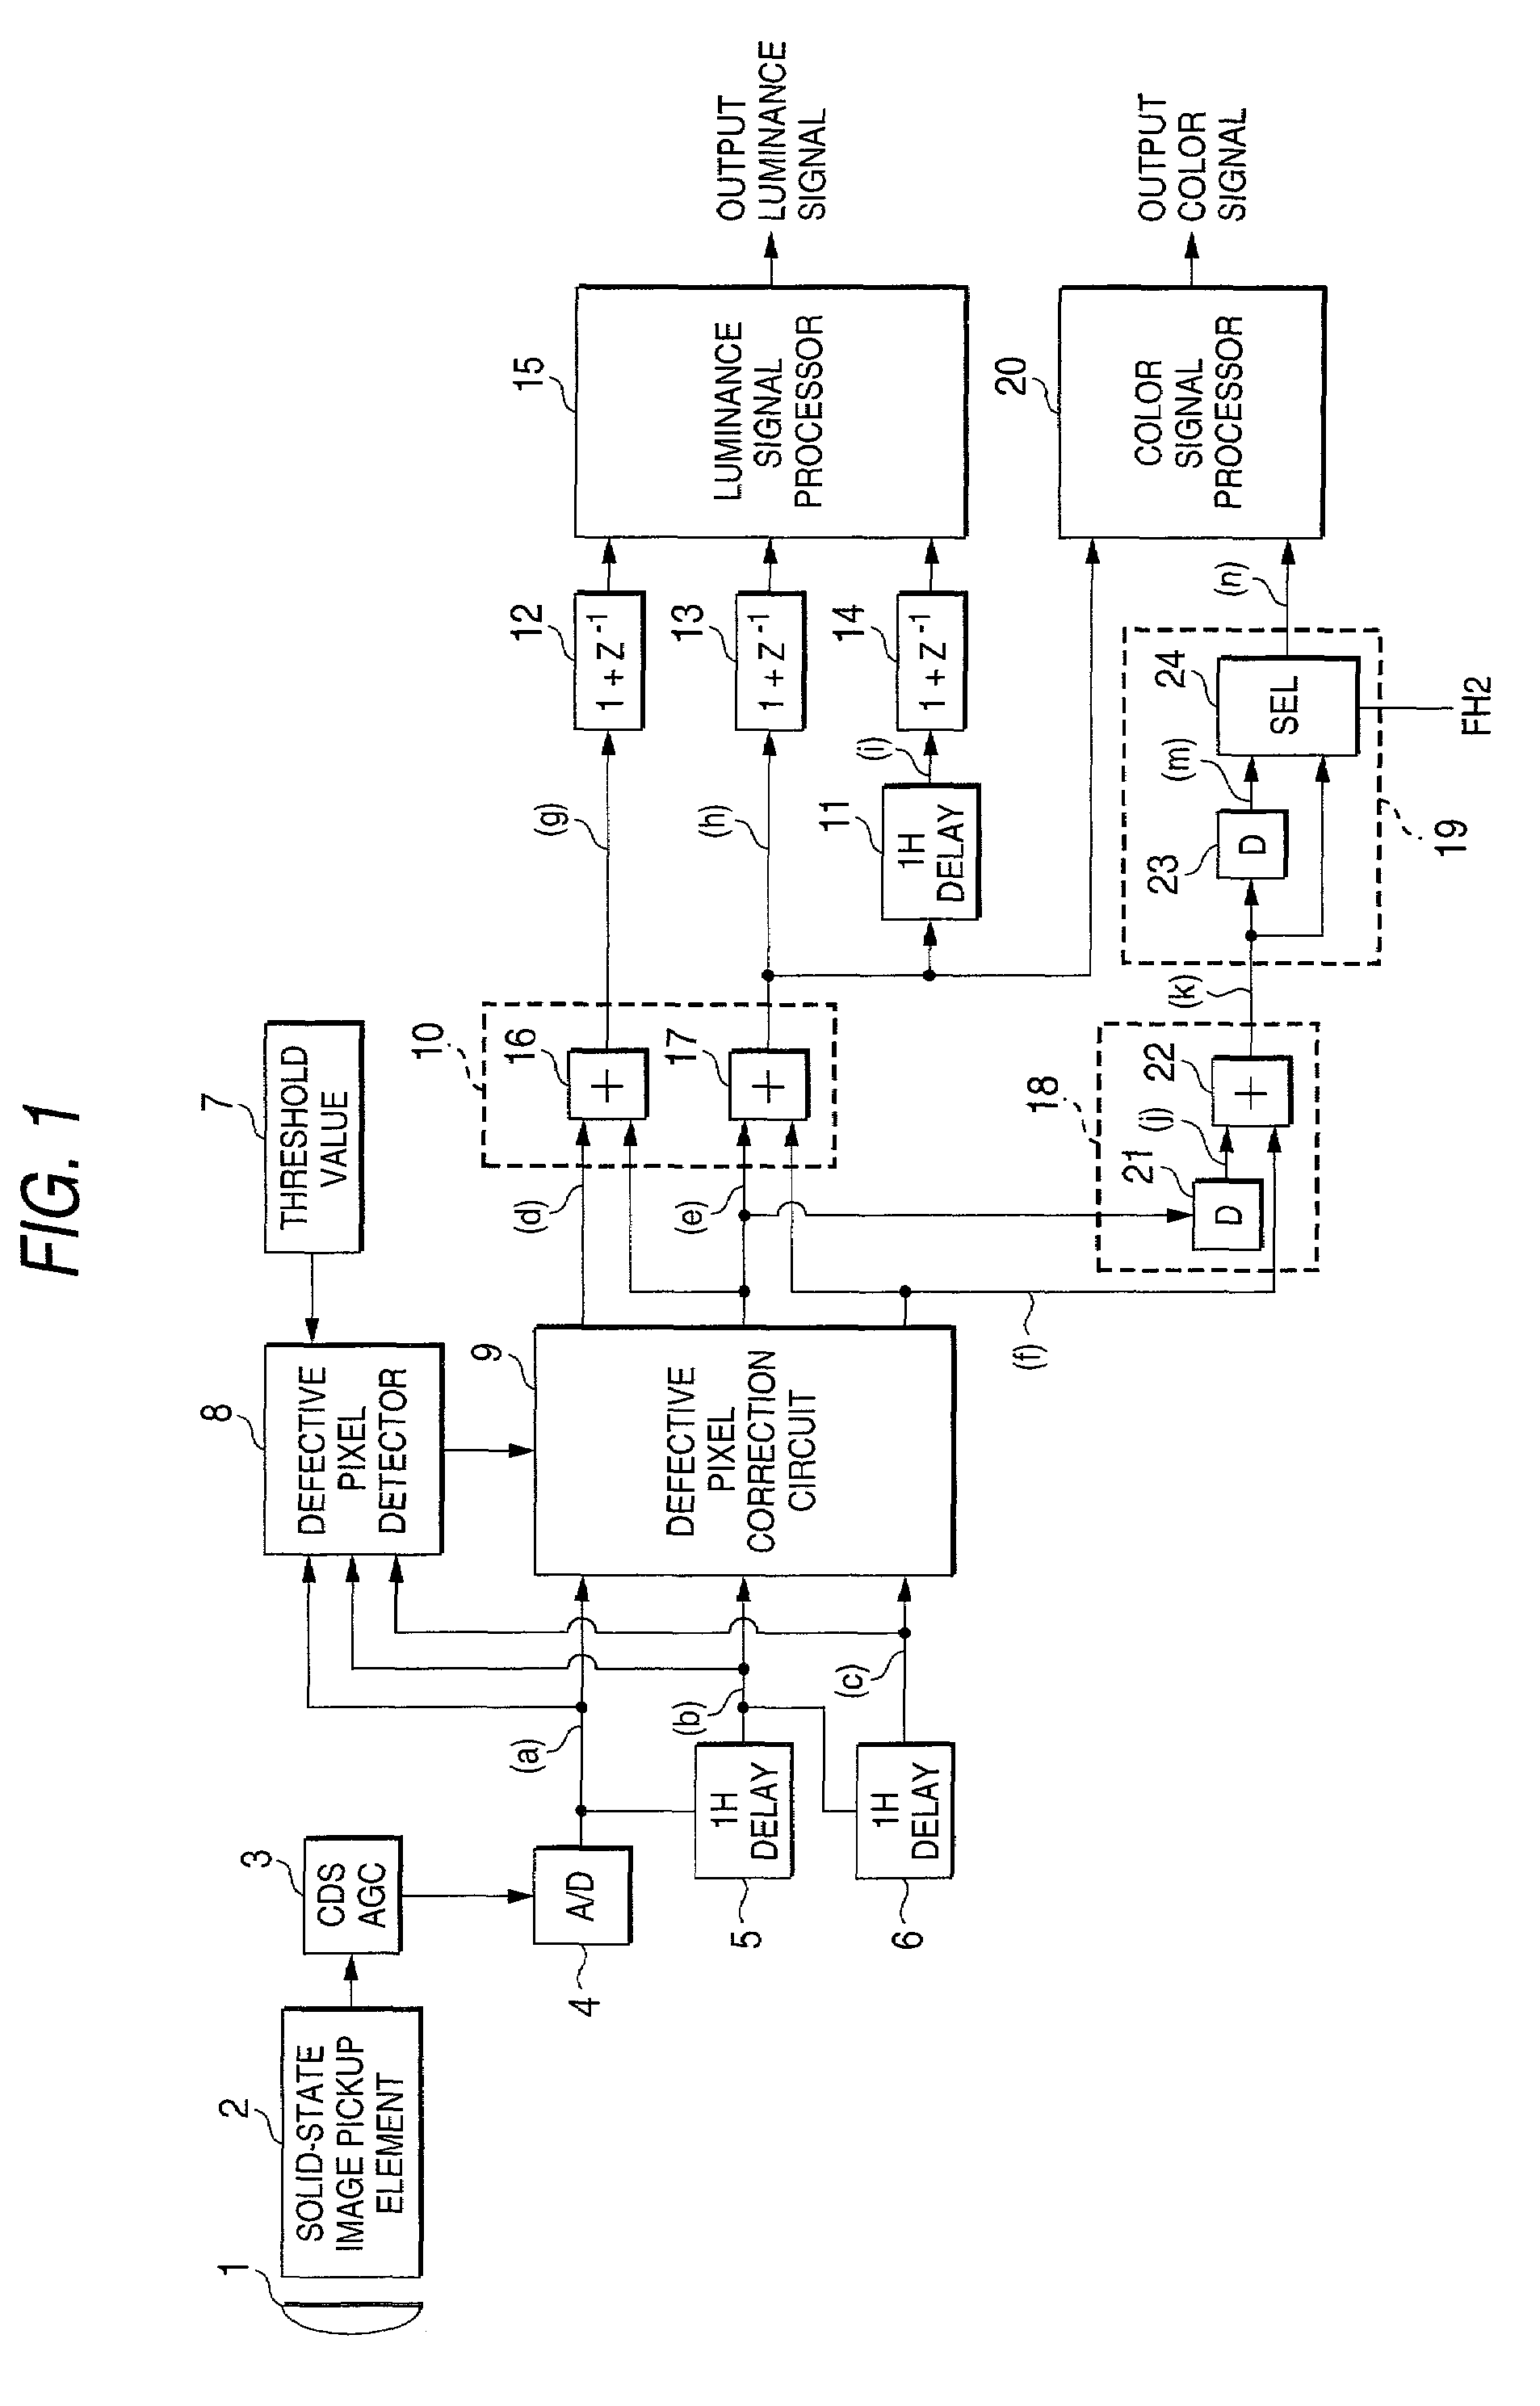 Defective pixel detection and correction apparatus using target pixel and adjacent pixel data